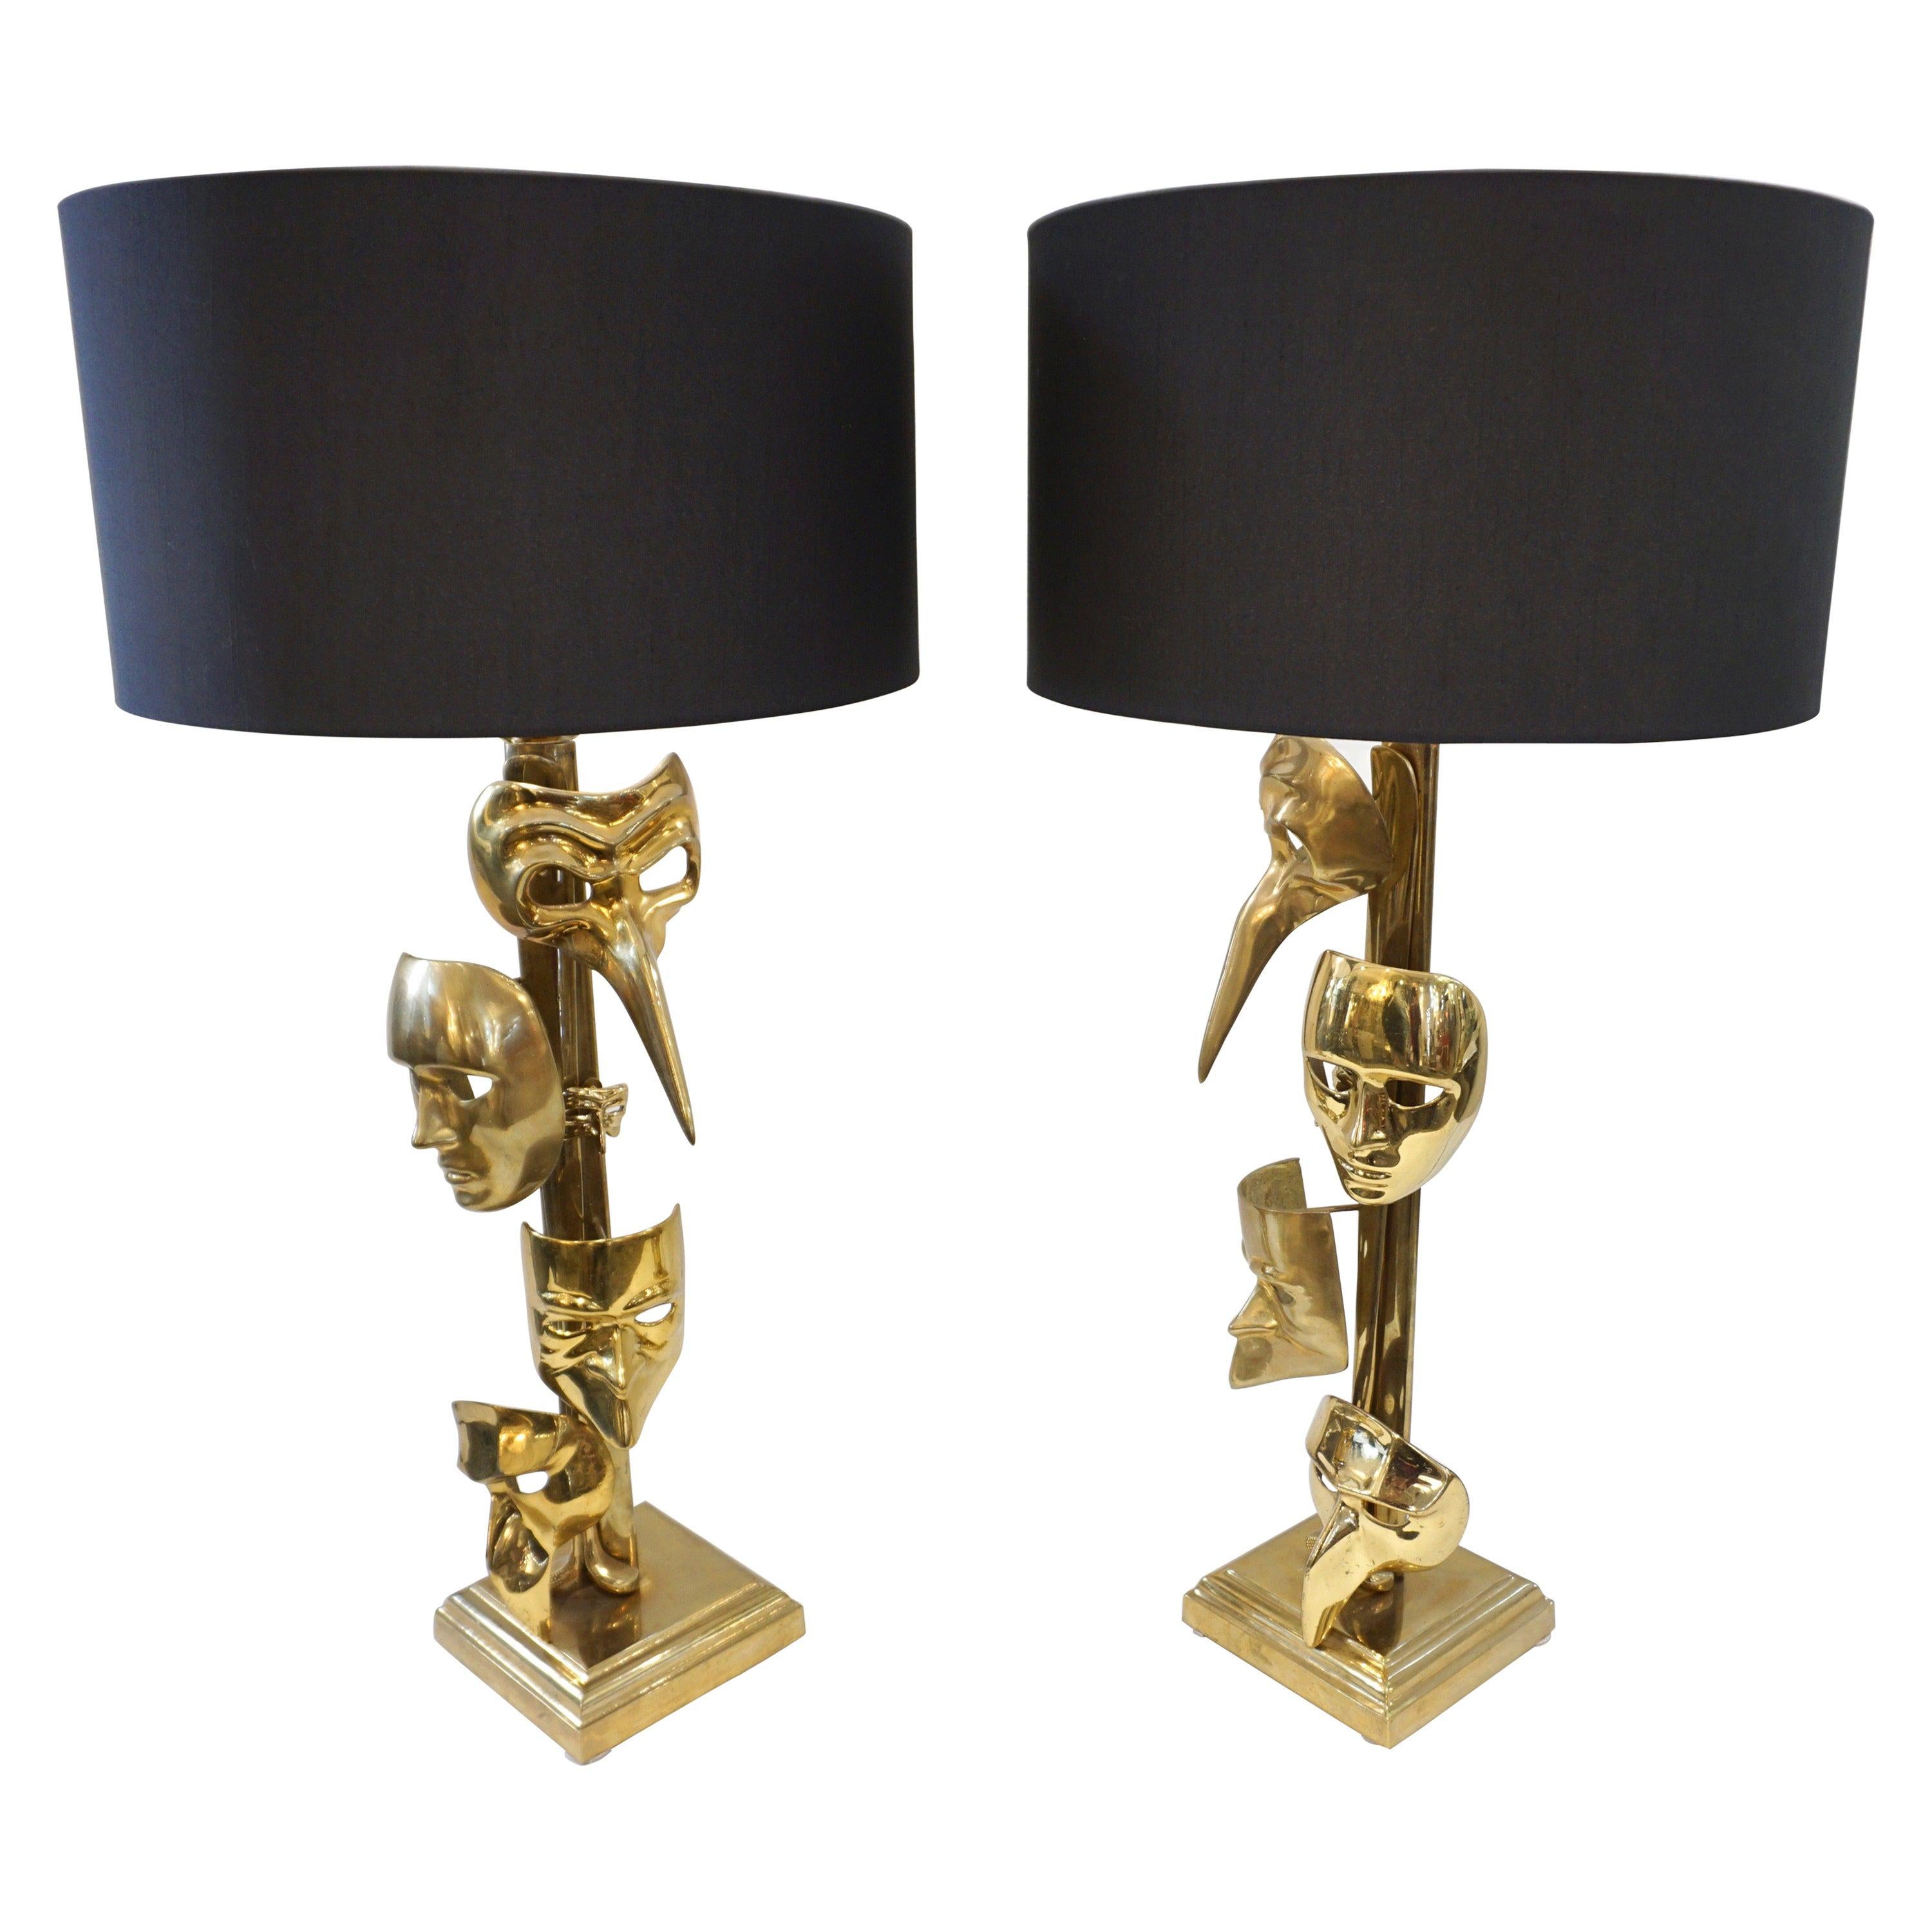 One of a Kind Italian Pair Deco Modern Art Lamps with Cast Brass Carnival Masks